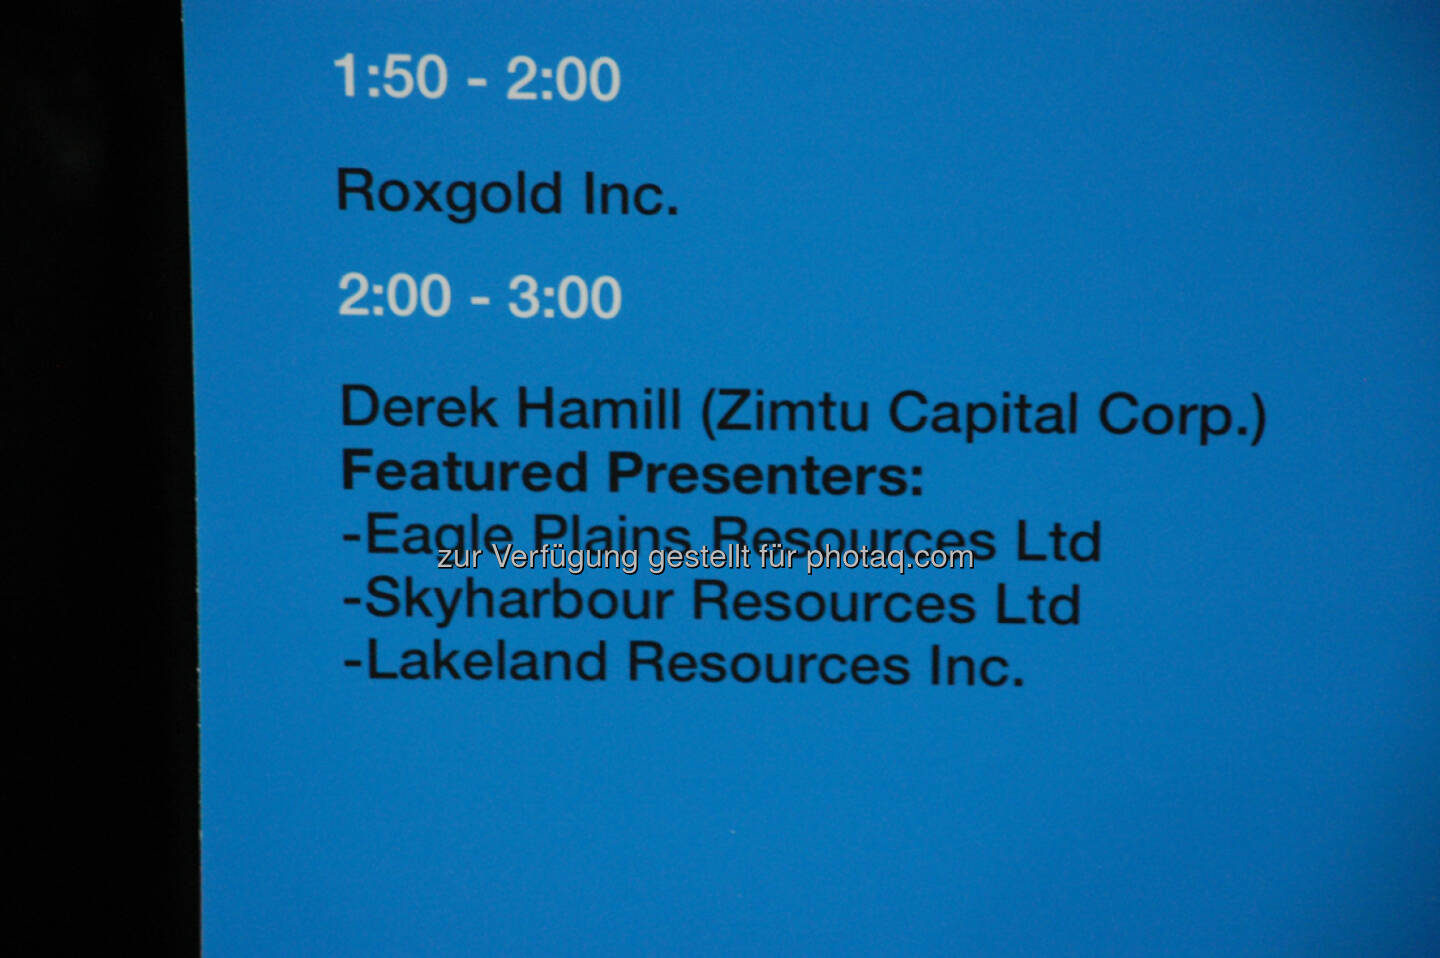 Workshop Room 5: Afternoon Schedule at the 2014 Vancouver Resource Investment Conference